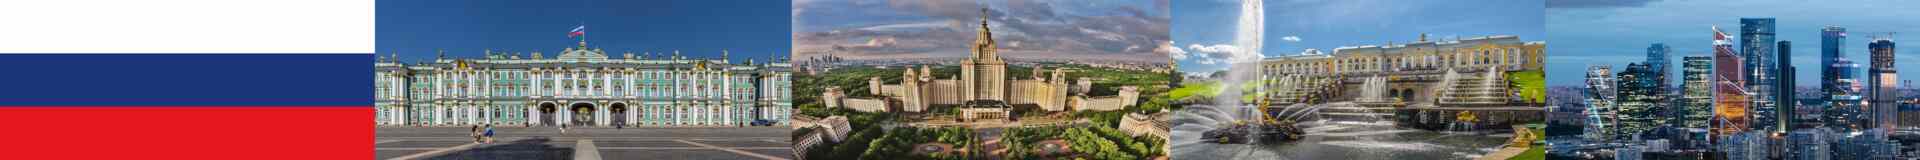 Global Russia Pharmaceutical Products Tenders